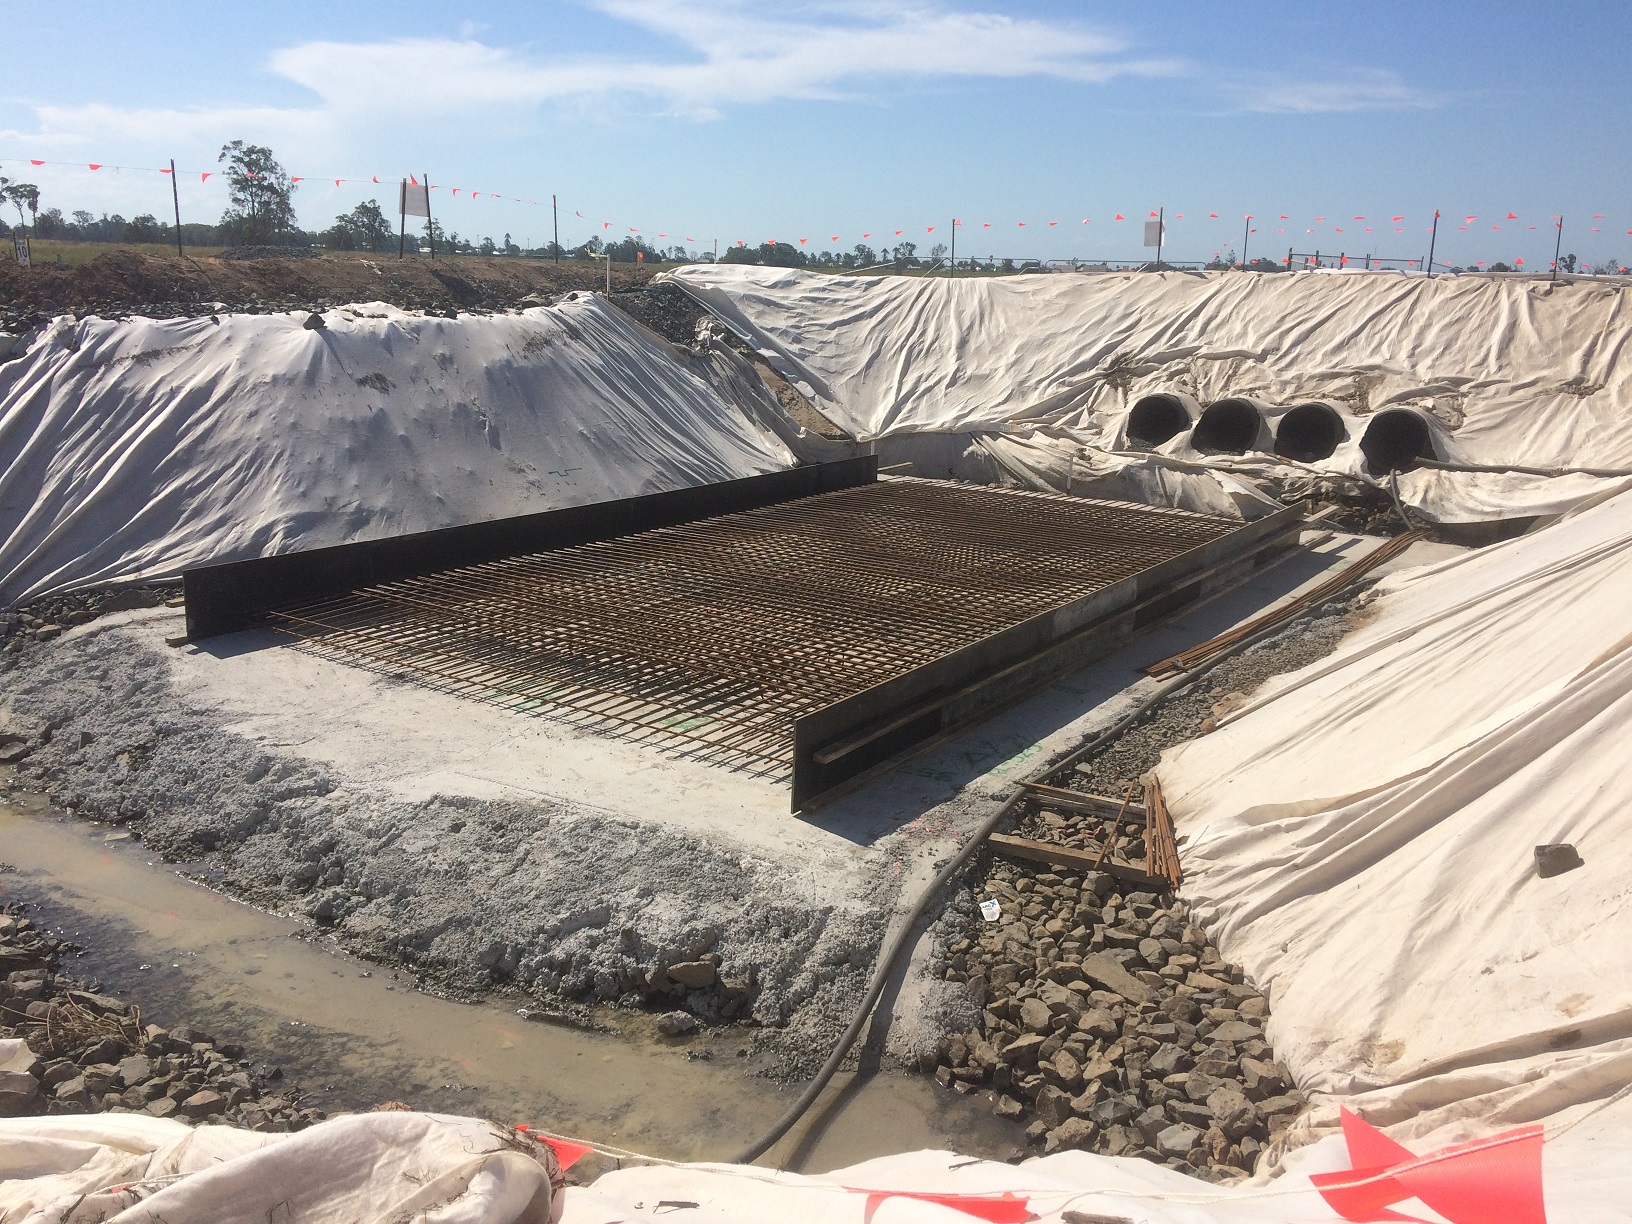 Large culverts were constructed in environmentally sensitive areas